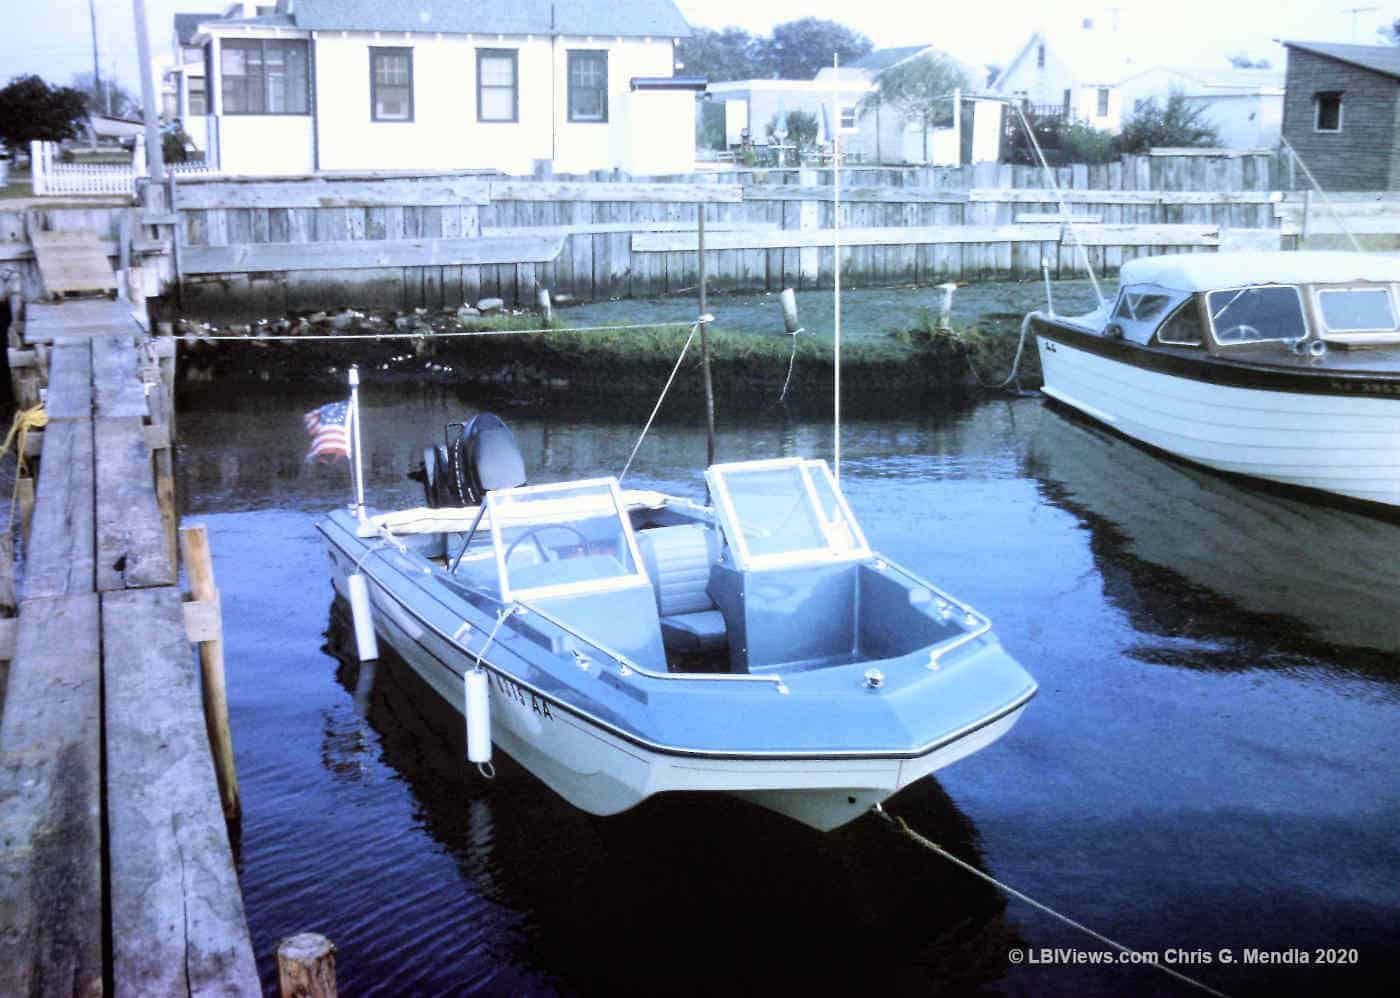 15' MFG and a Penn Yan in the cove at 17th Street North Beach Haven -1970s'